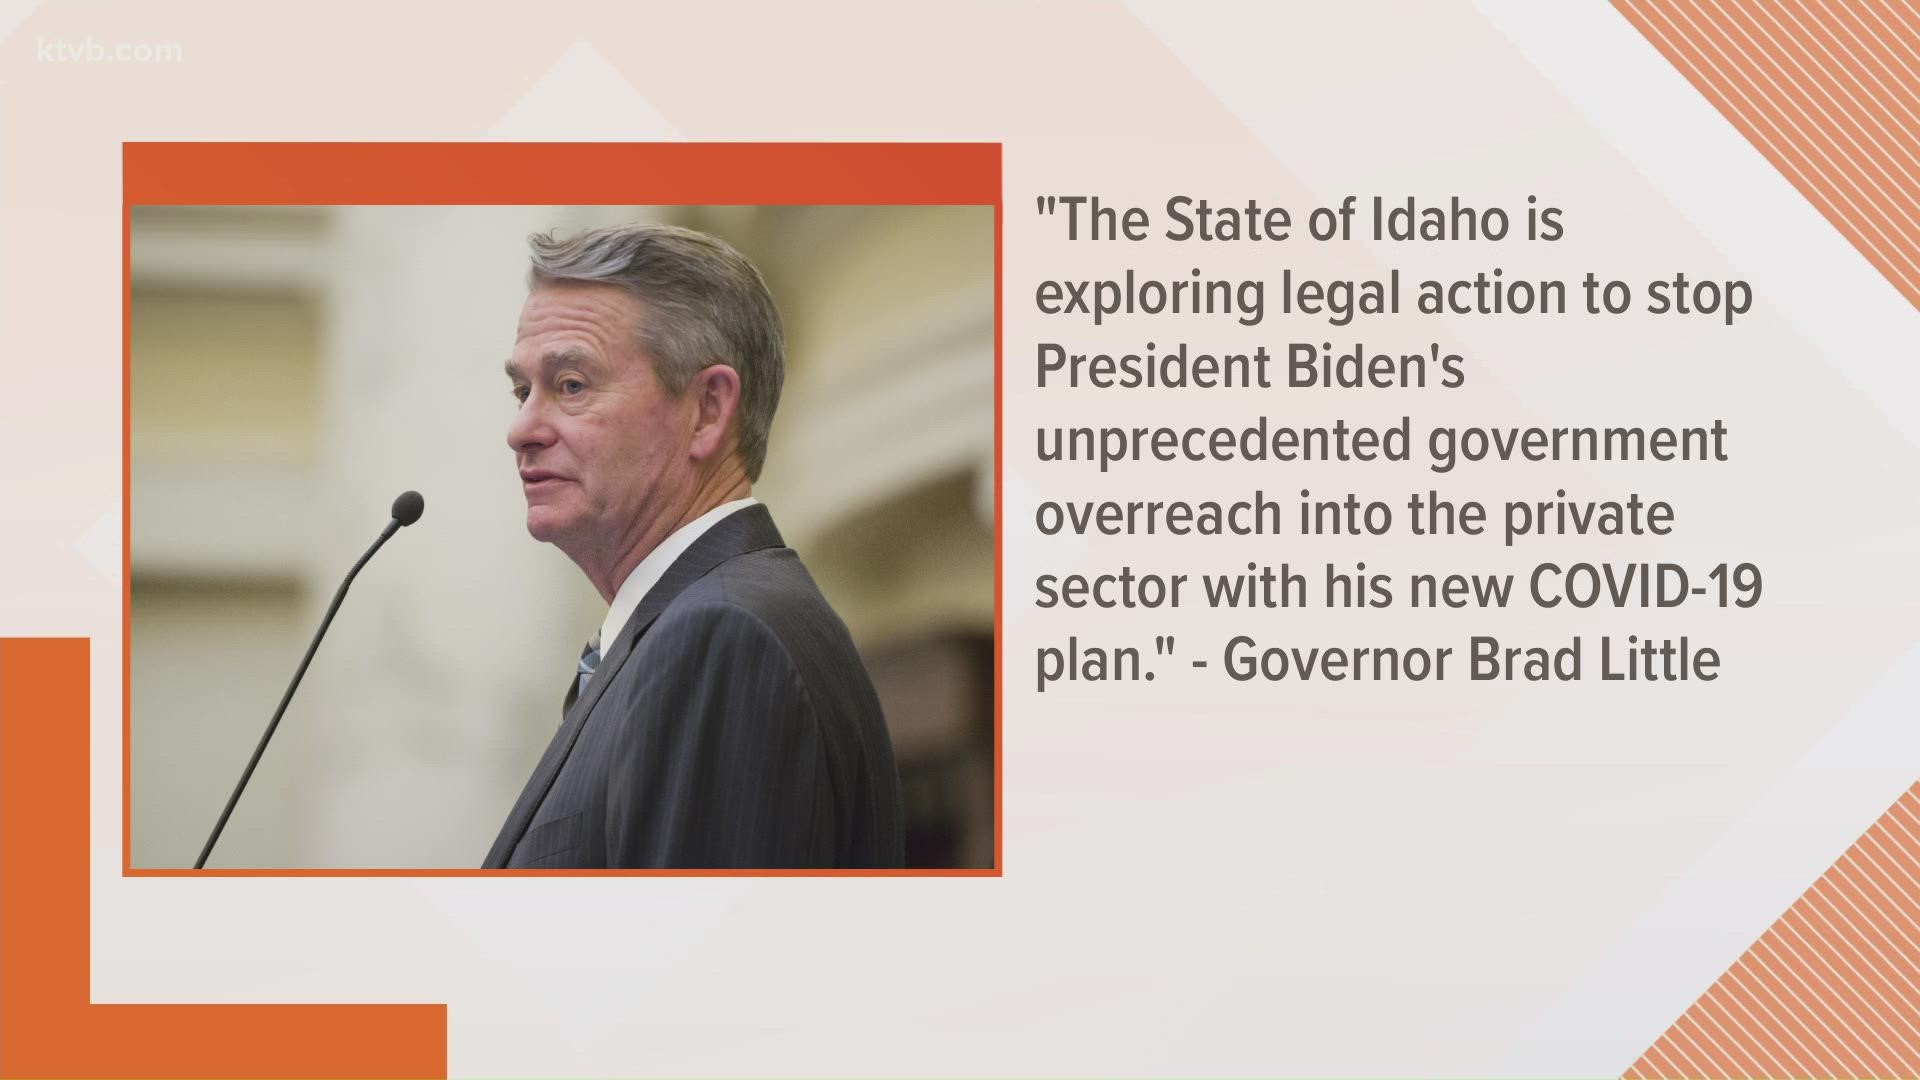 The governor said he hopes to, "stop President  Biden's unprecedented government overreach into the private sector."